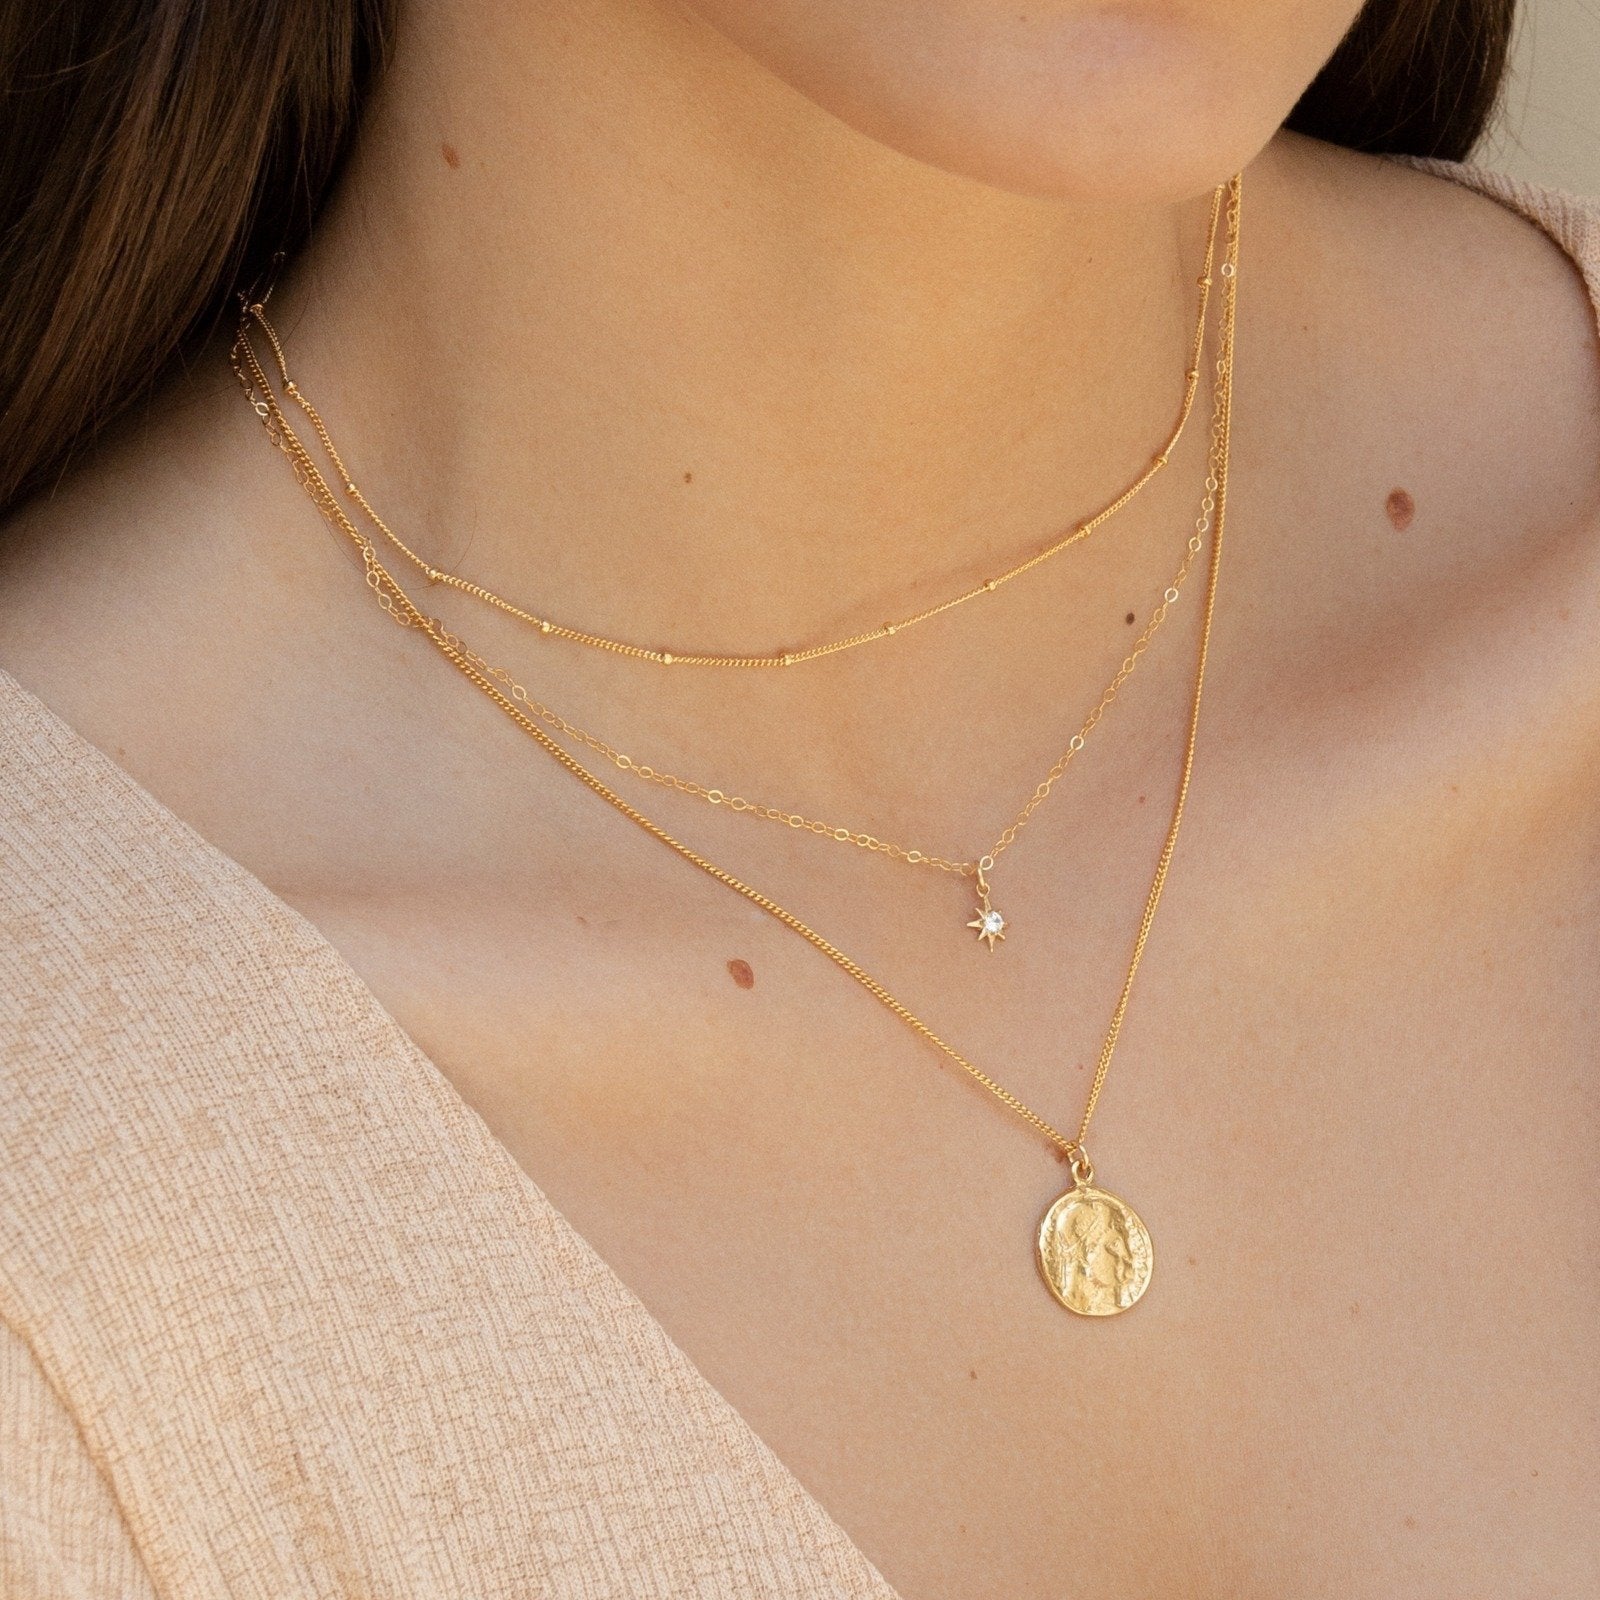 Exactly How to Layer Necklaces, According to a Stylist